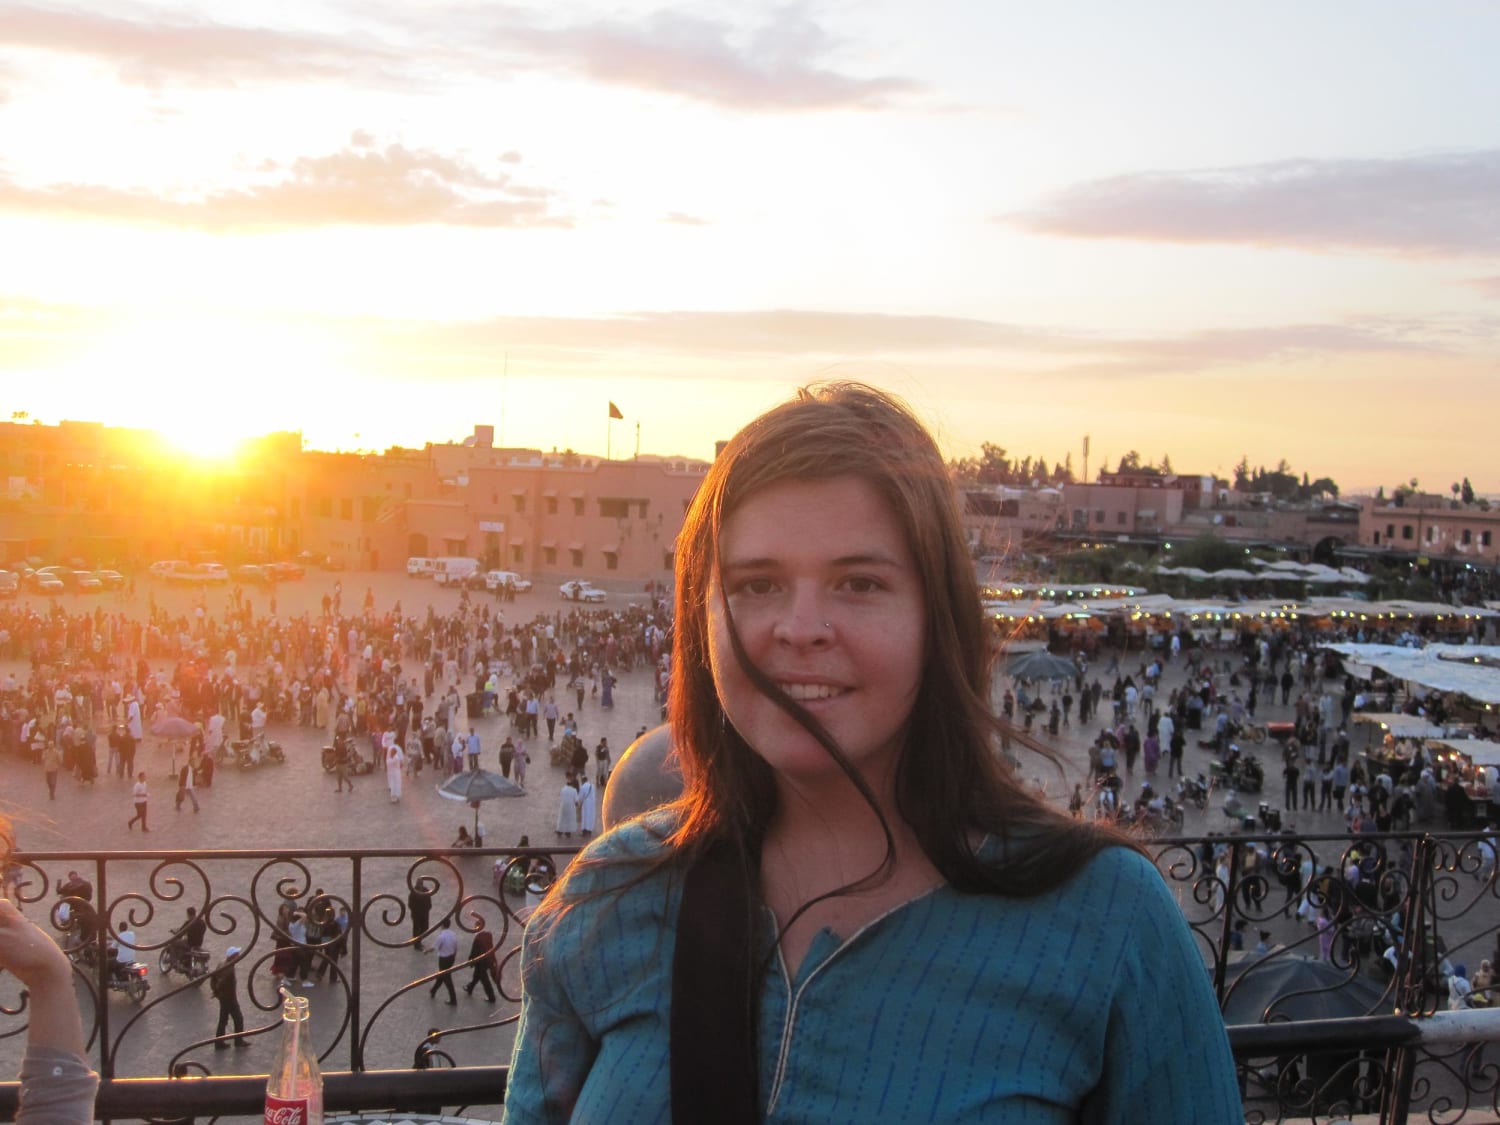 American ISIS Hostage KAYLA MUELLER Is Dead, Family Says - NBC.